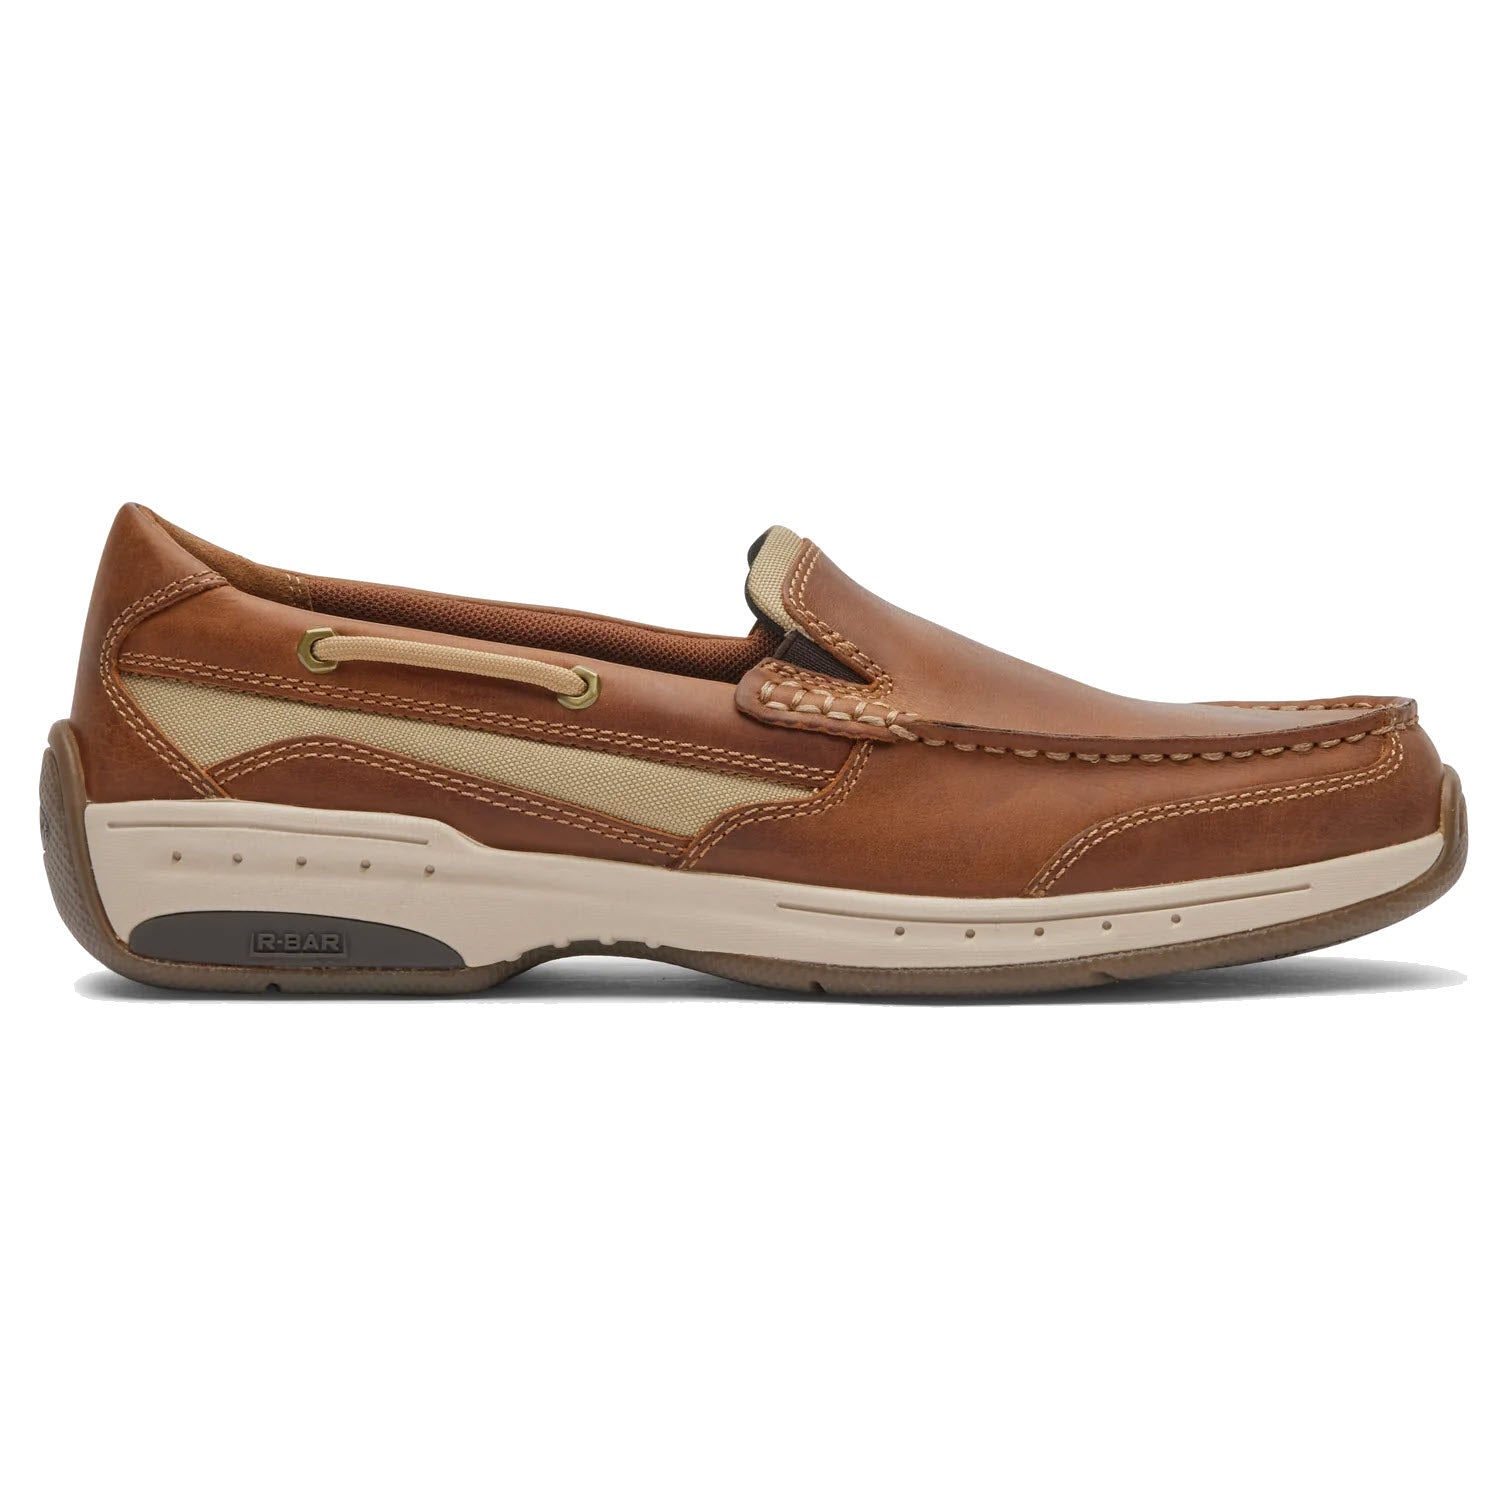 Brown leather slip-on loafer with rubber sole and stitching details, displayed on a white background DUNHAM CAPTAIN VENETIAN TAN LEATHER - MENS by Dunham.